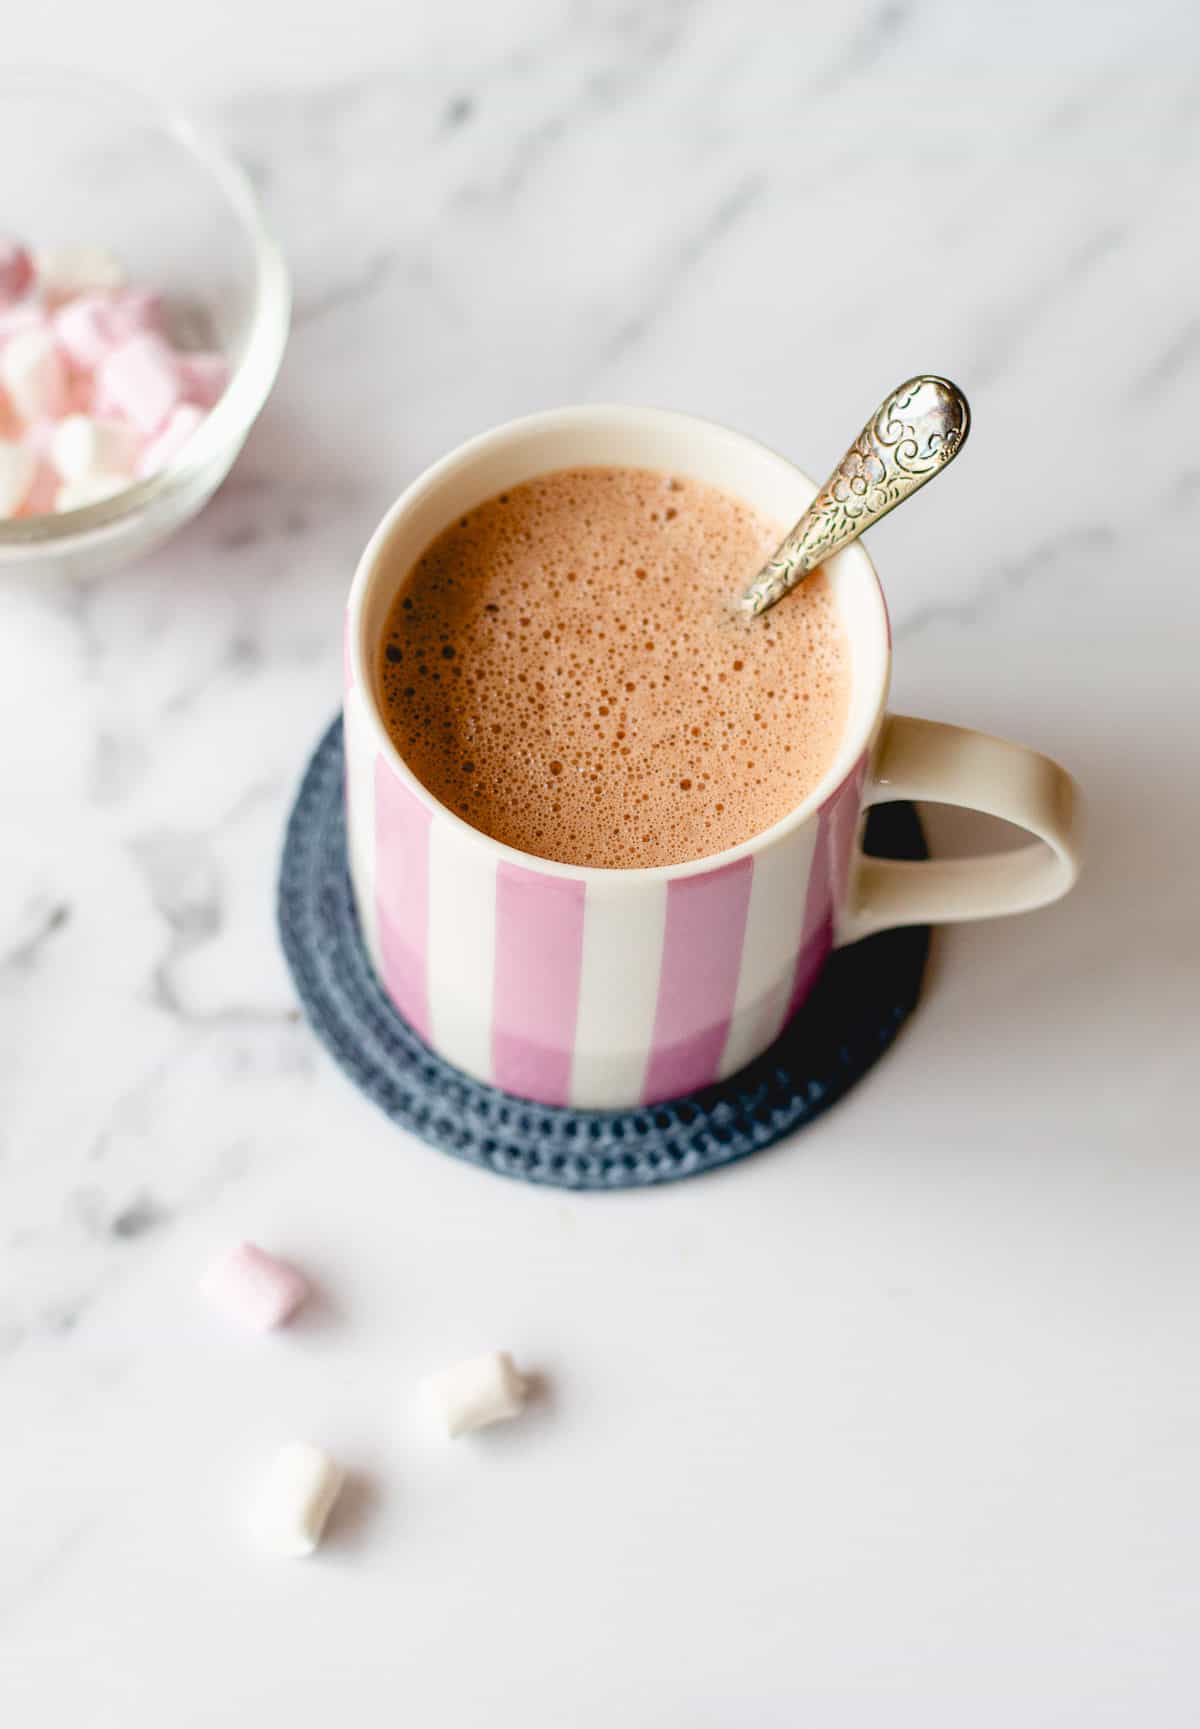 An image of hot chocolate and marshmallows in a pink and white stripy mug on a blue coaster and marble background.